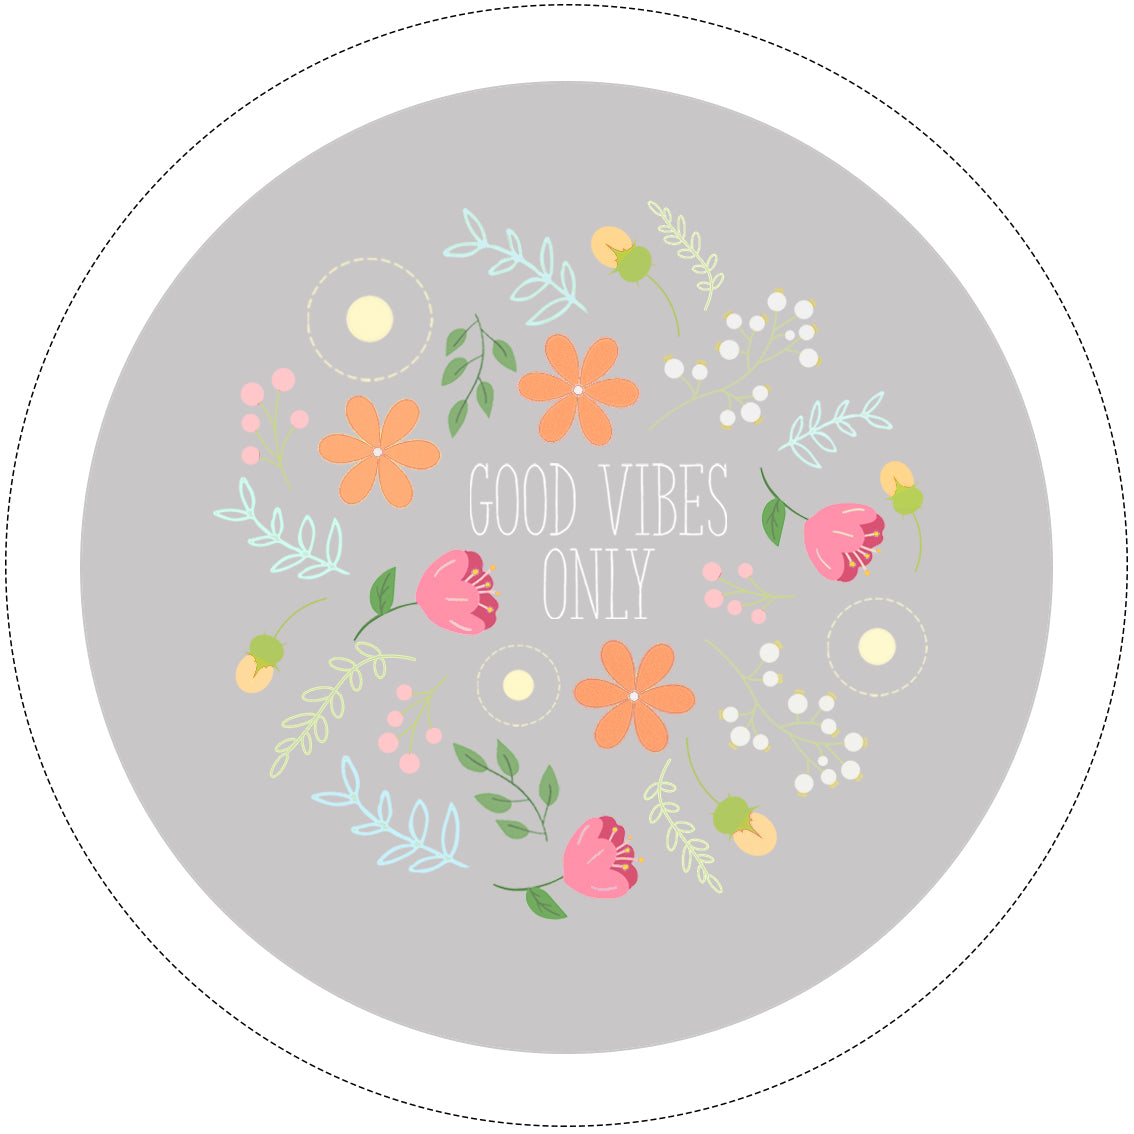 Embroidery pattern download